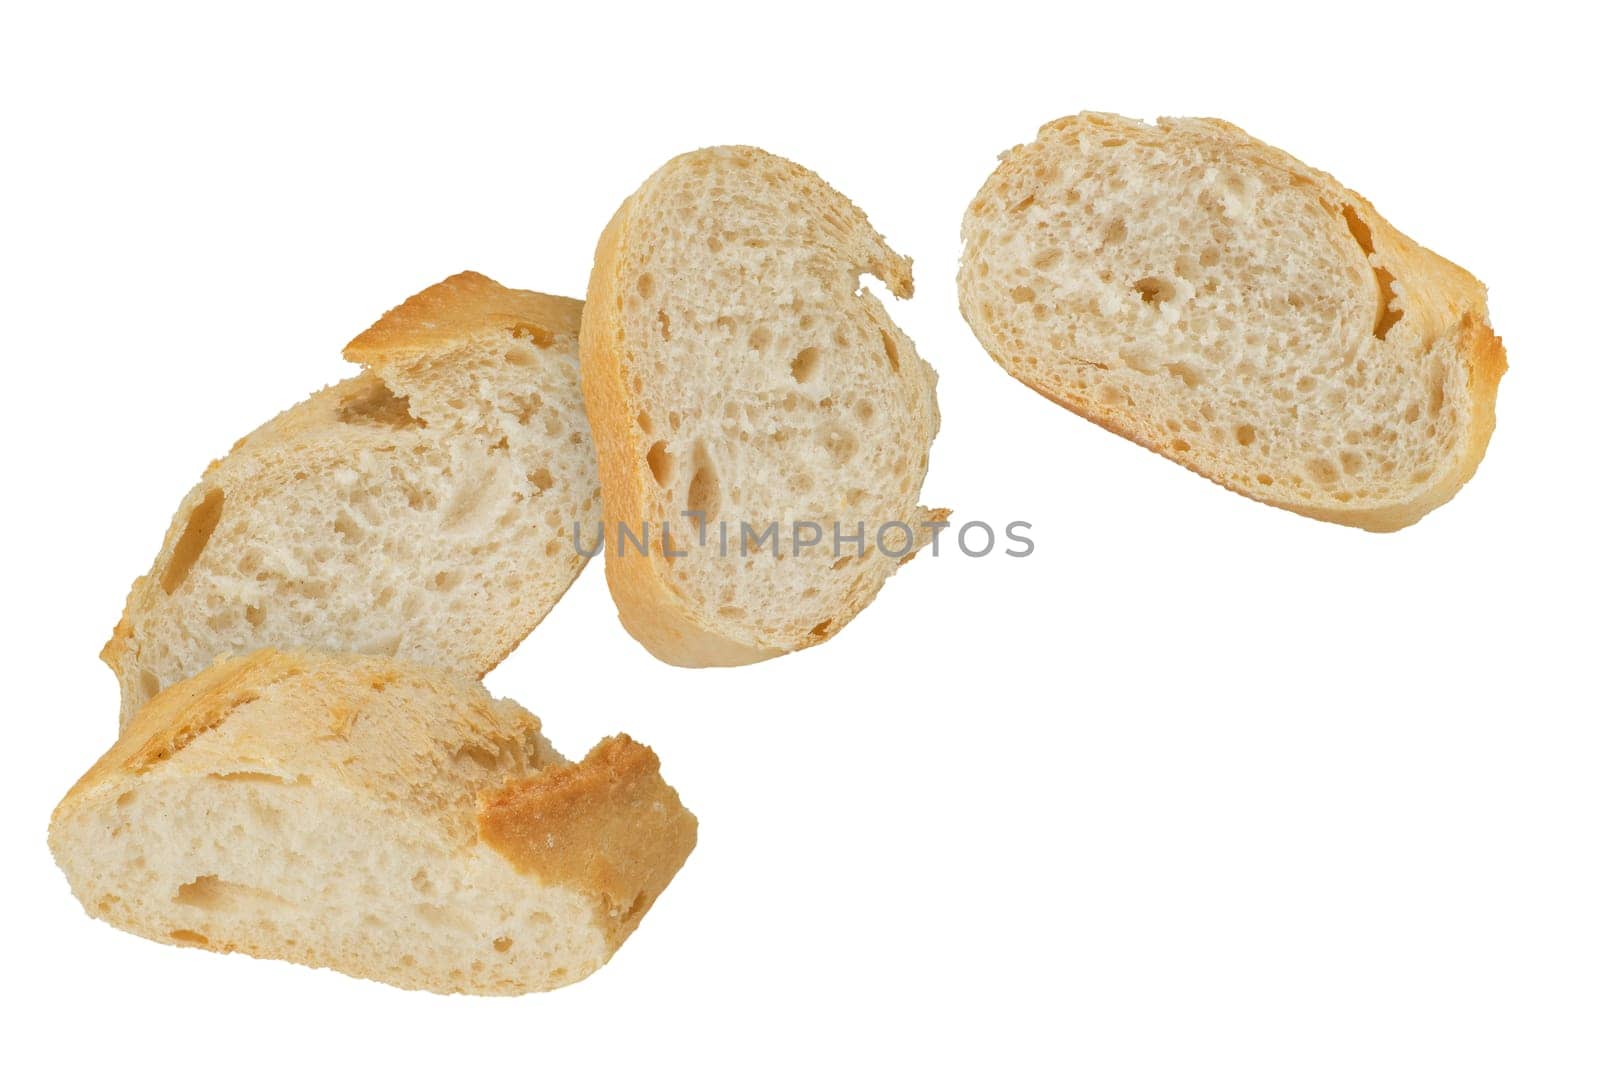 Slices of white long bread isolated on white background. Crispy French baguette slices, Sandwich concept to insert into a design or project